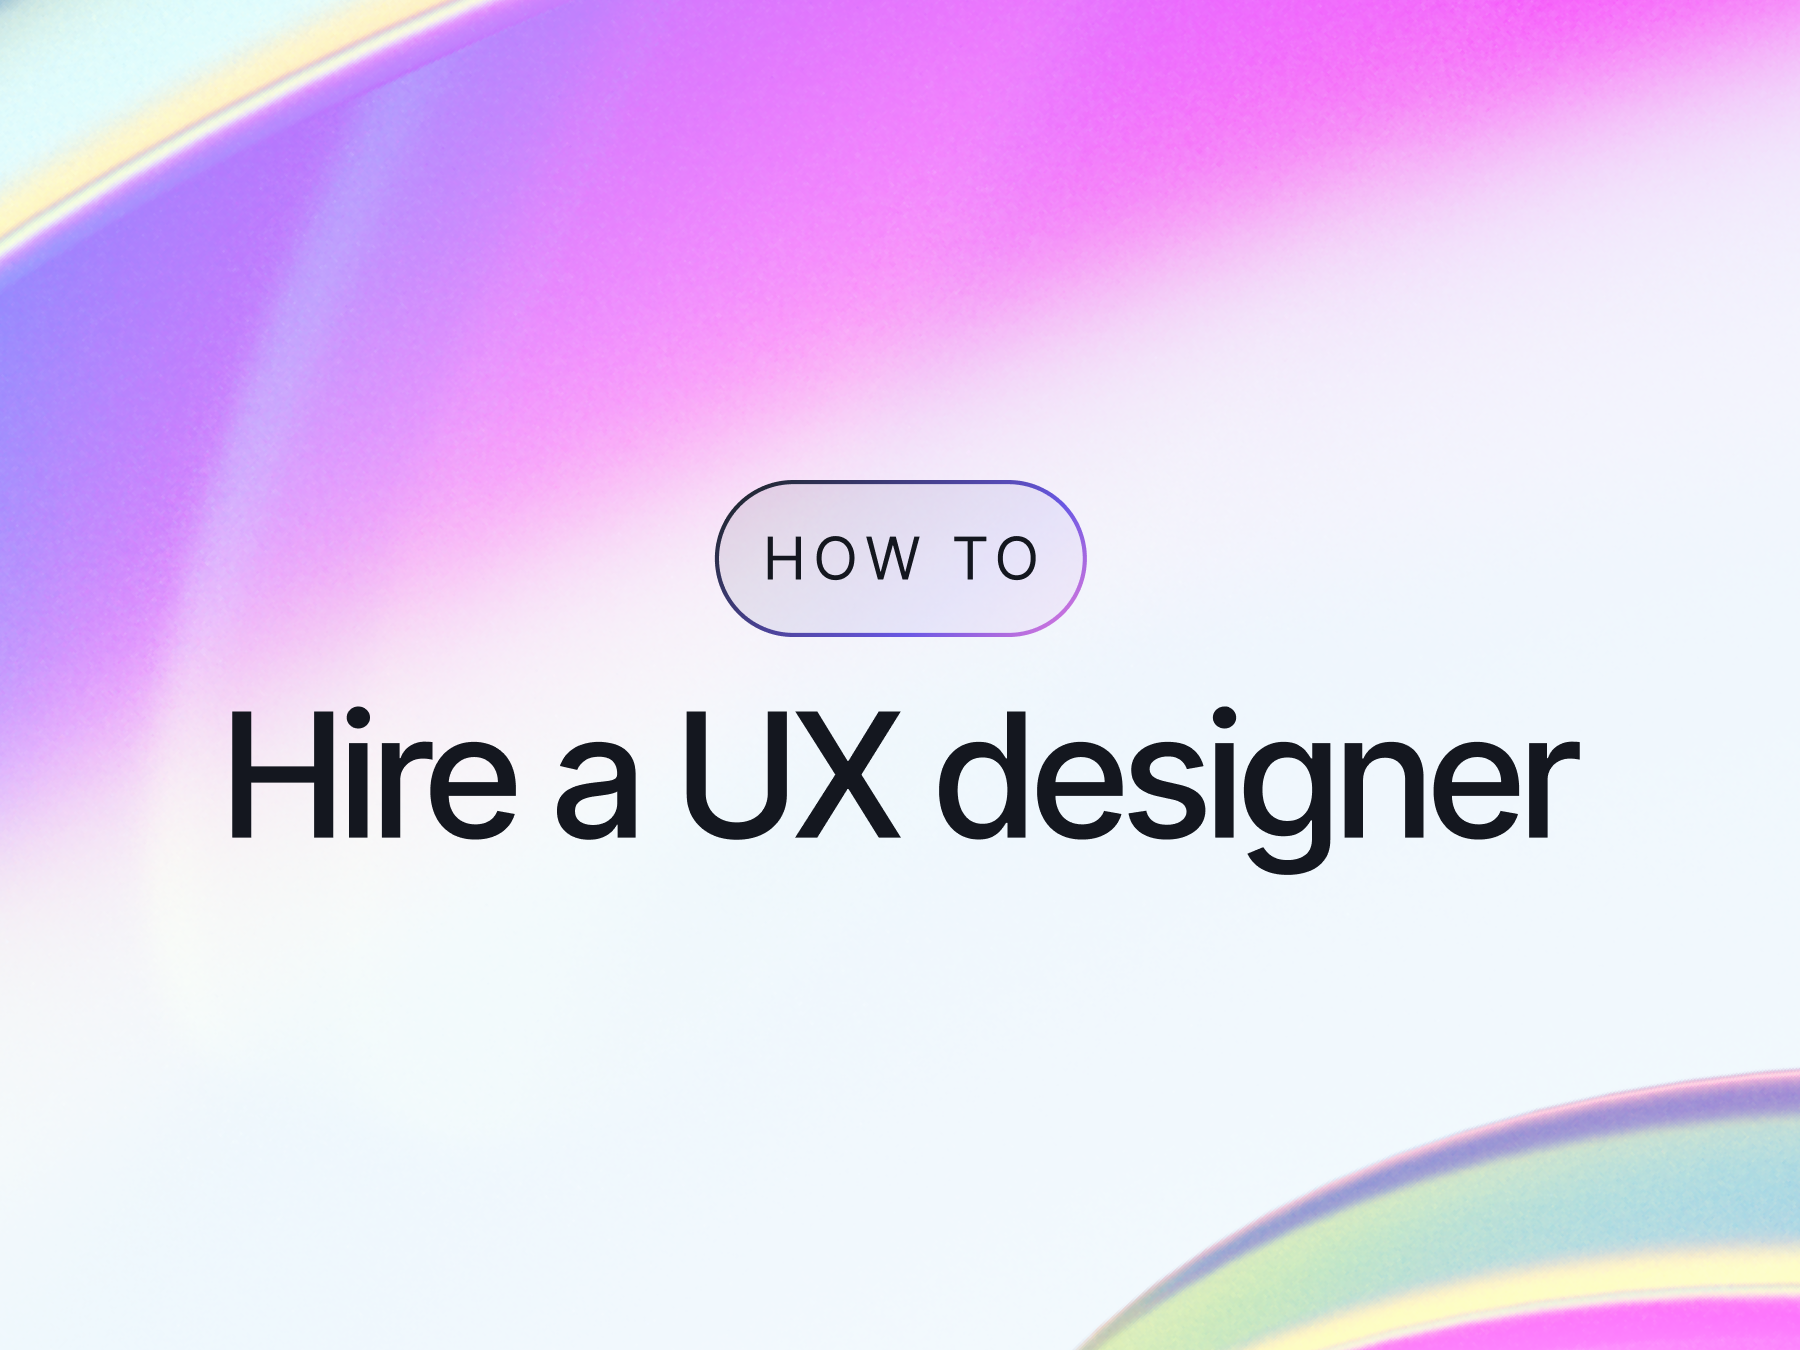 How to Hire a UX Designer